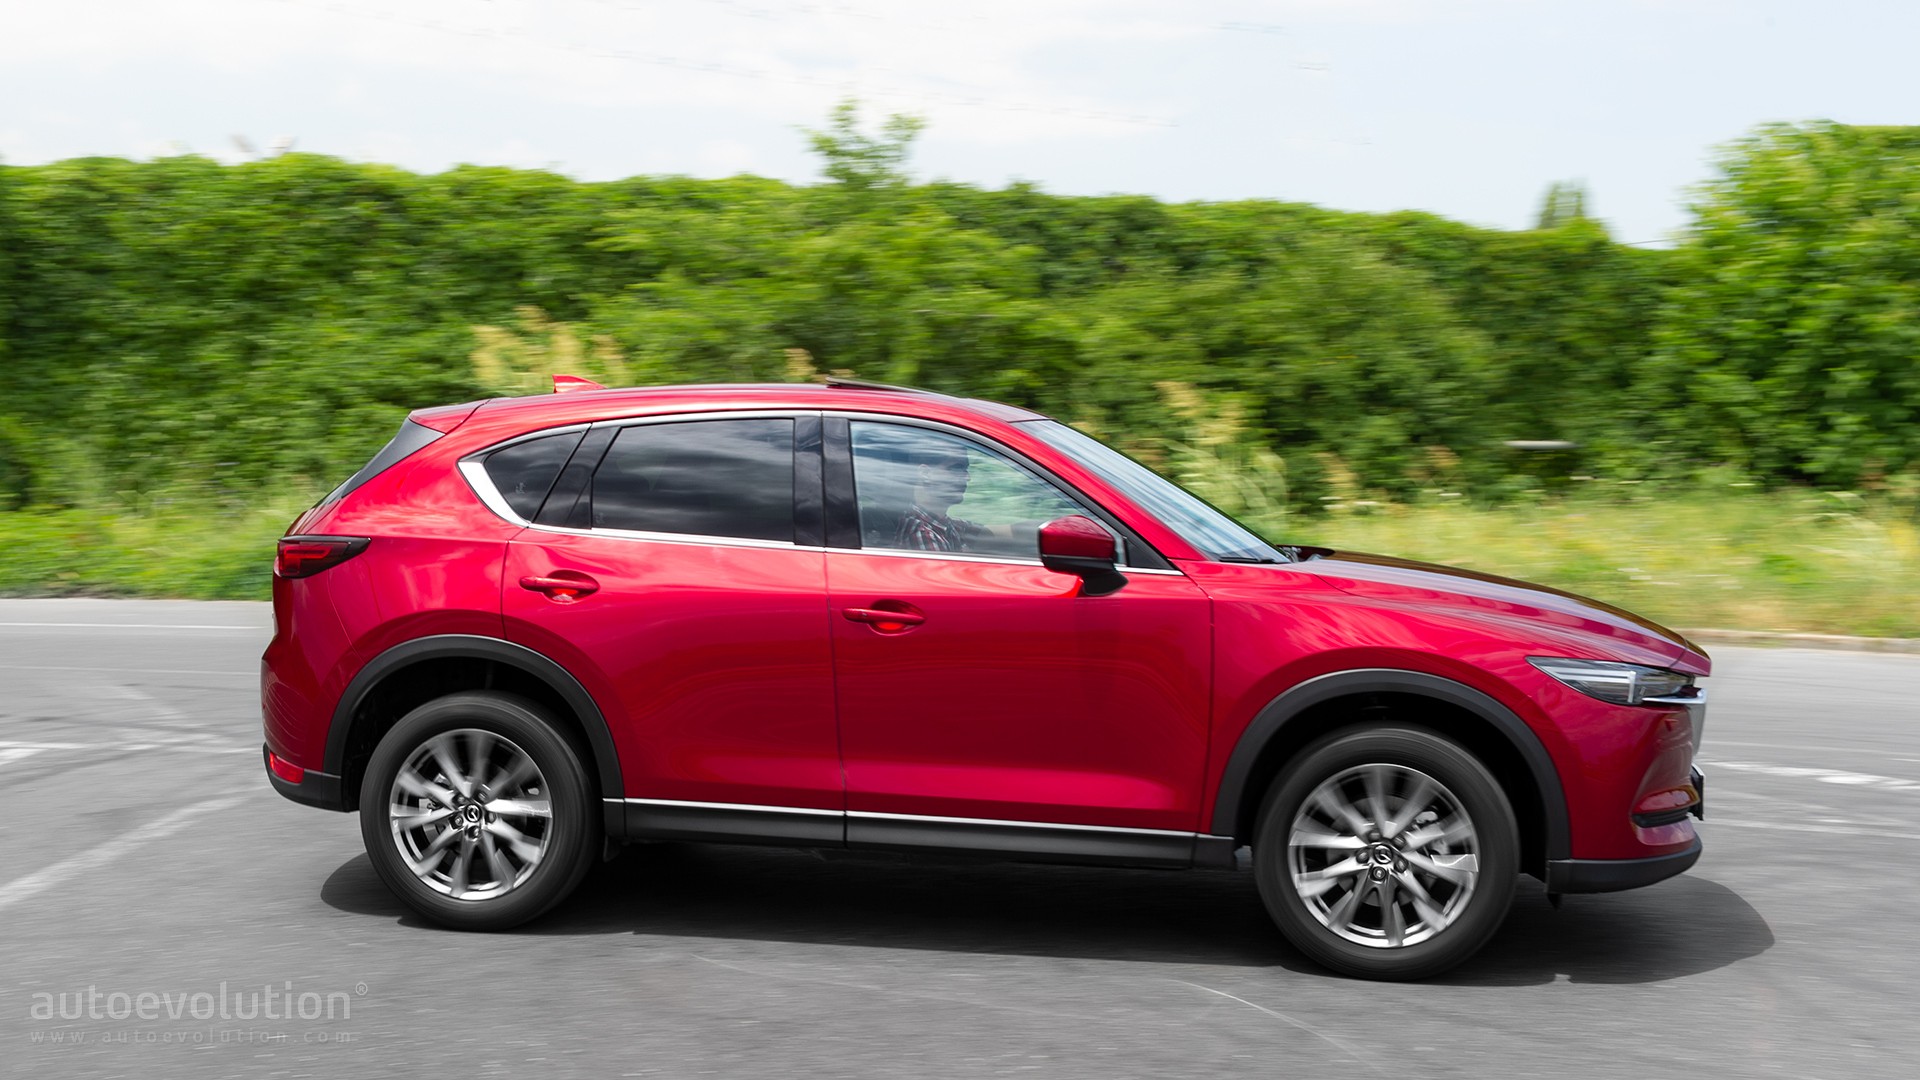 56 Best Pictures Mazda Cx 5 Sport Price : 2015 Mazda CX-5 - Price, Photos, Reviews & Features